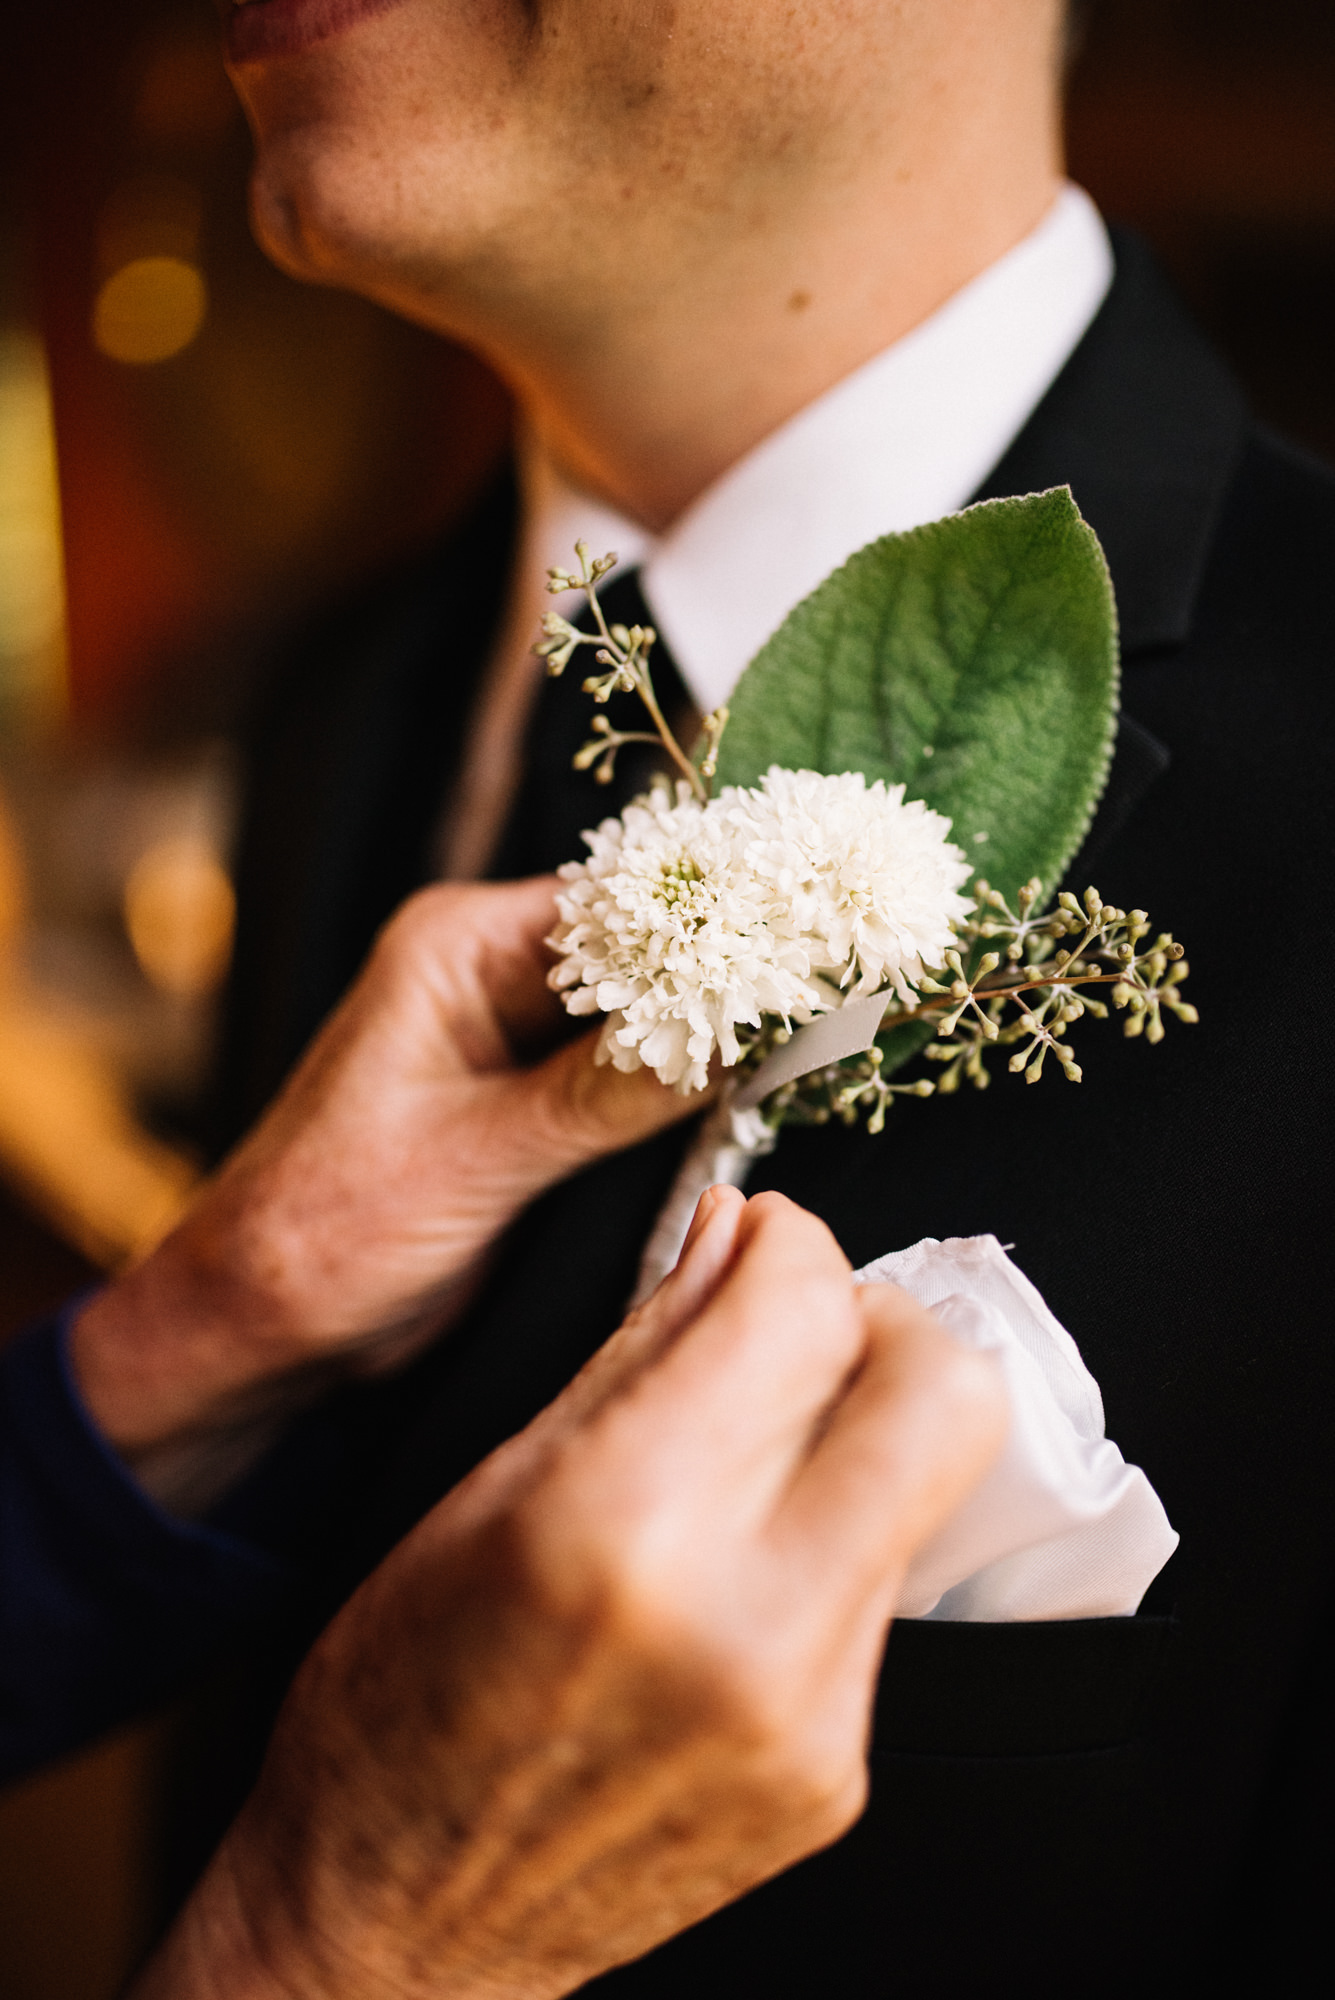 Lovely boutonniere from Diamond Custom Florals.